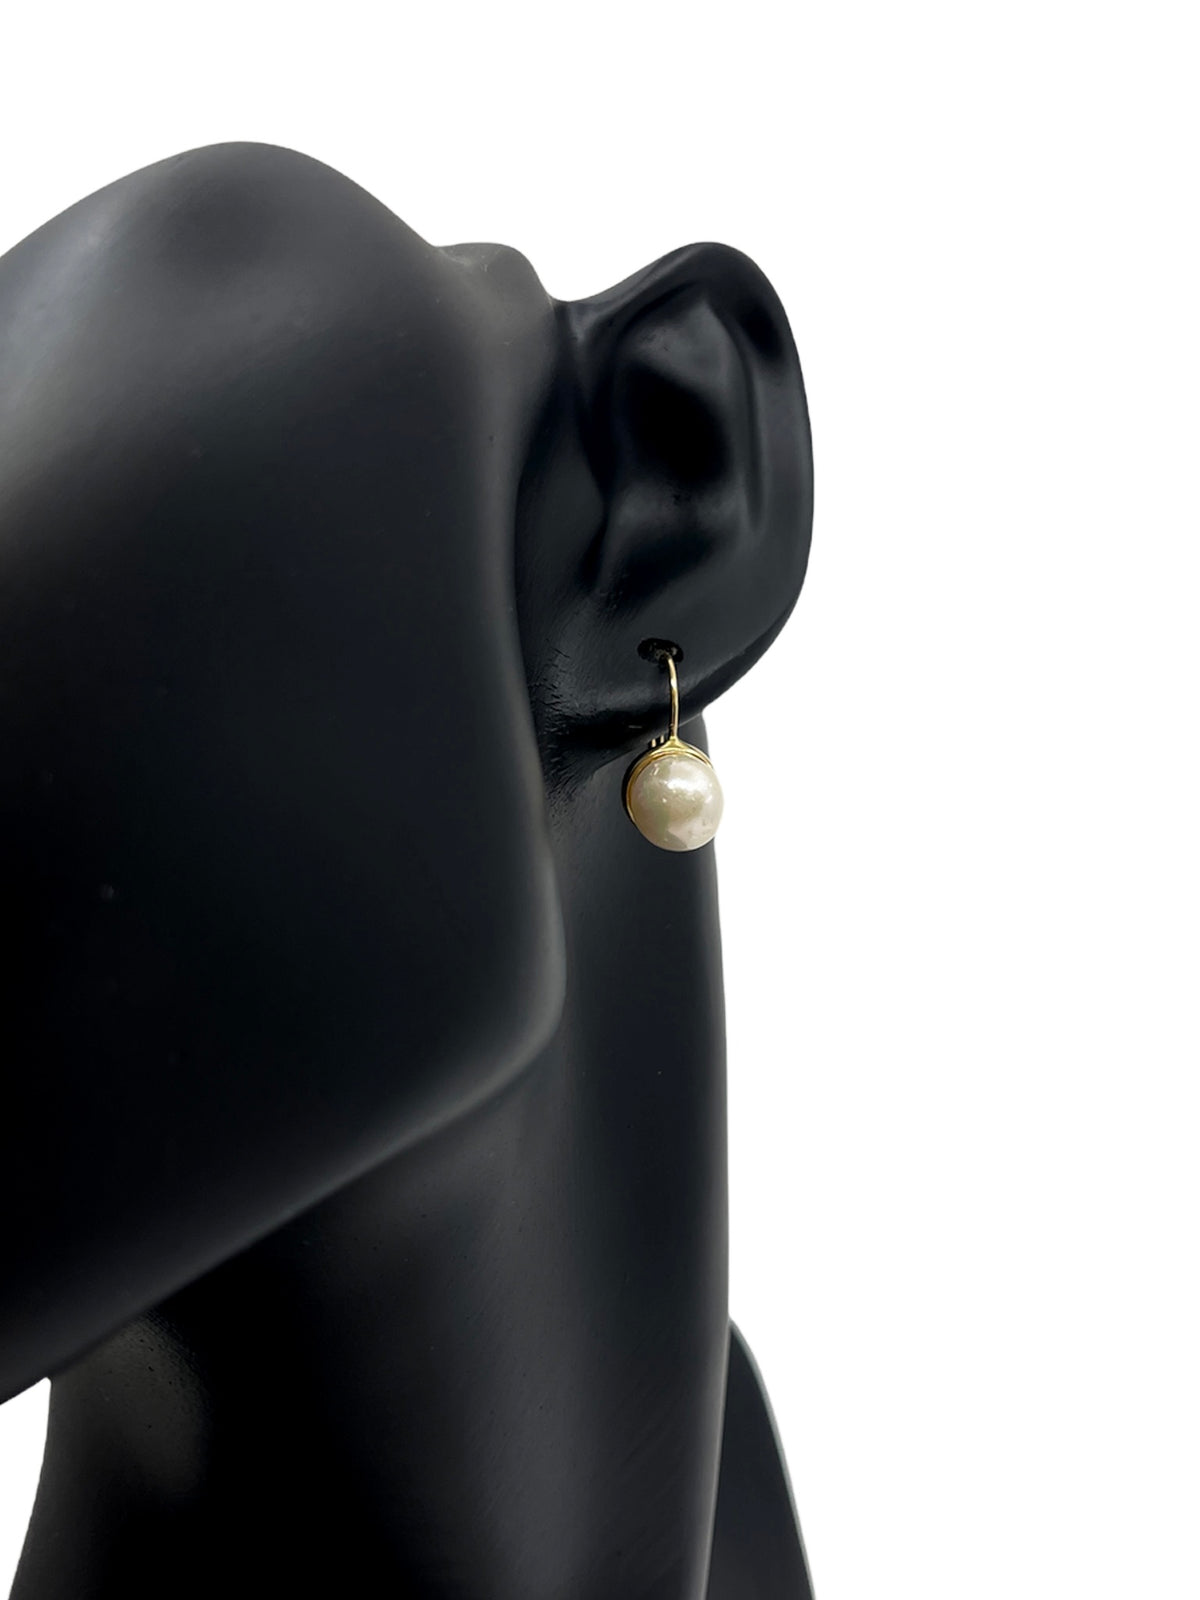 14K Yellow Gold Cultured Pearl Earrings with Lever Backs